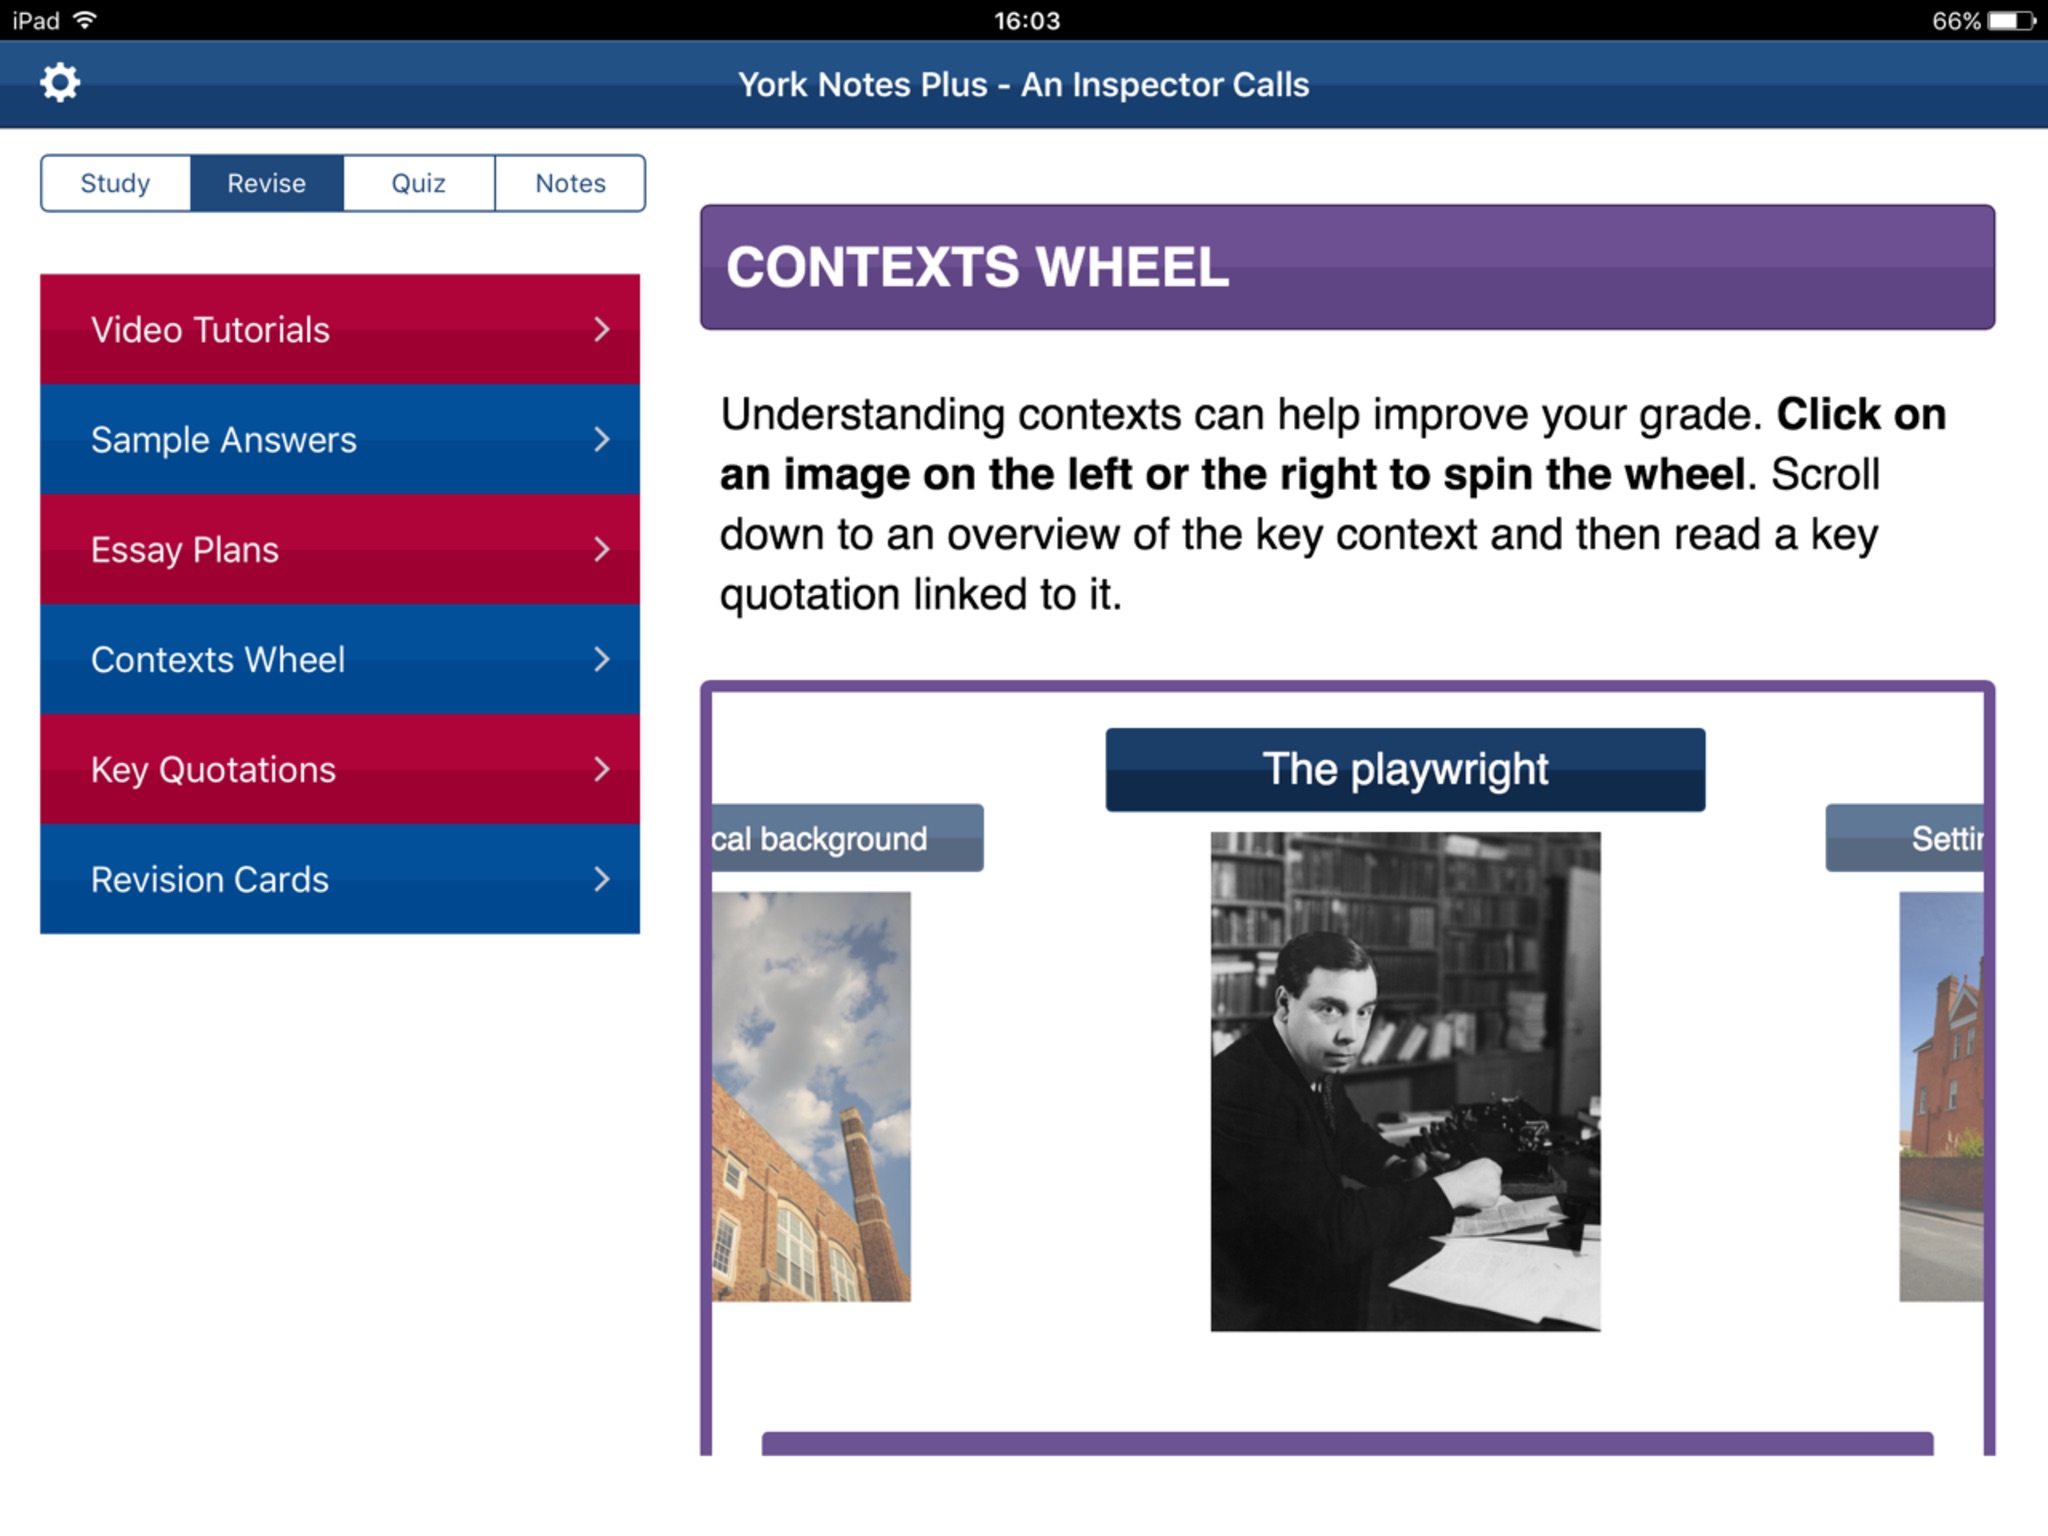 York Notes Study Guide for iPad screenshot 4